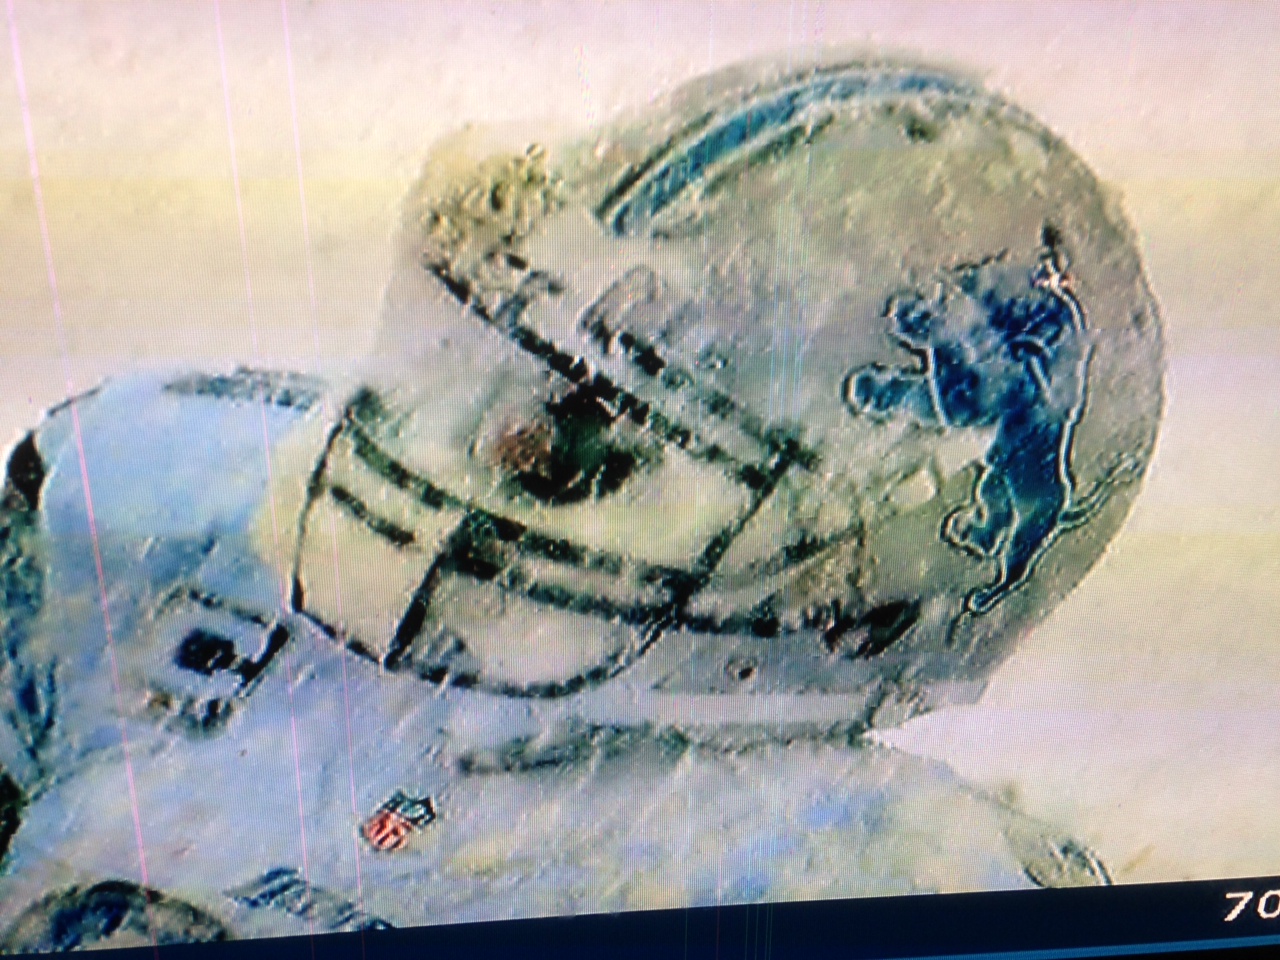 Calvin Johnson gets face full of snow after catch (GIF)